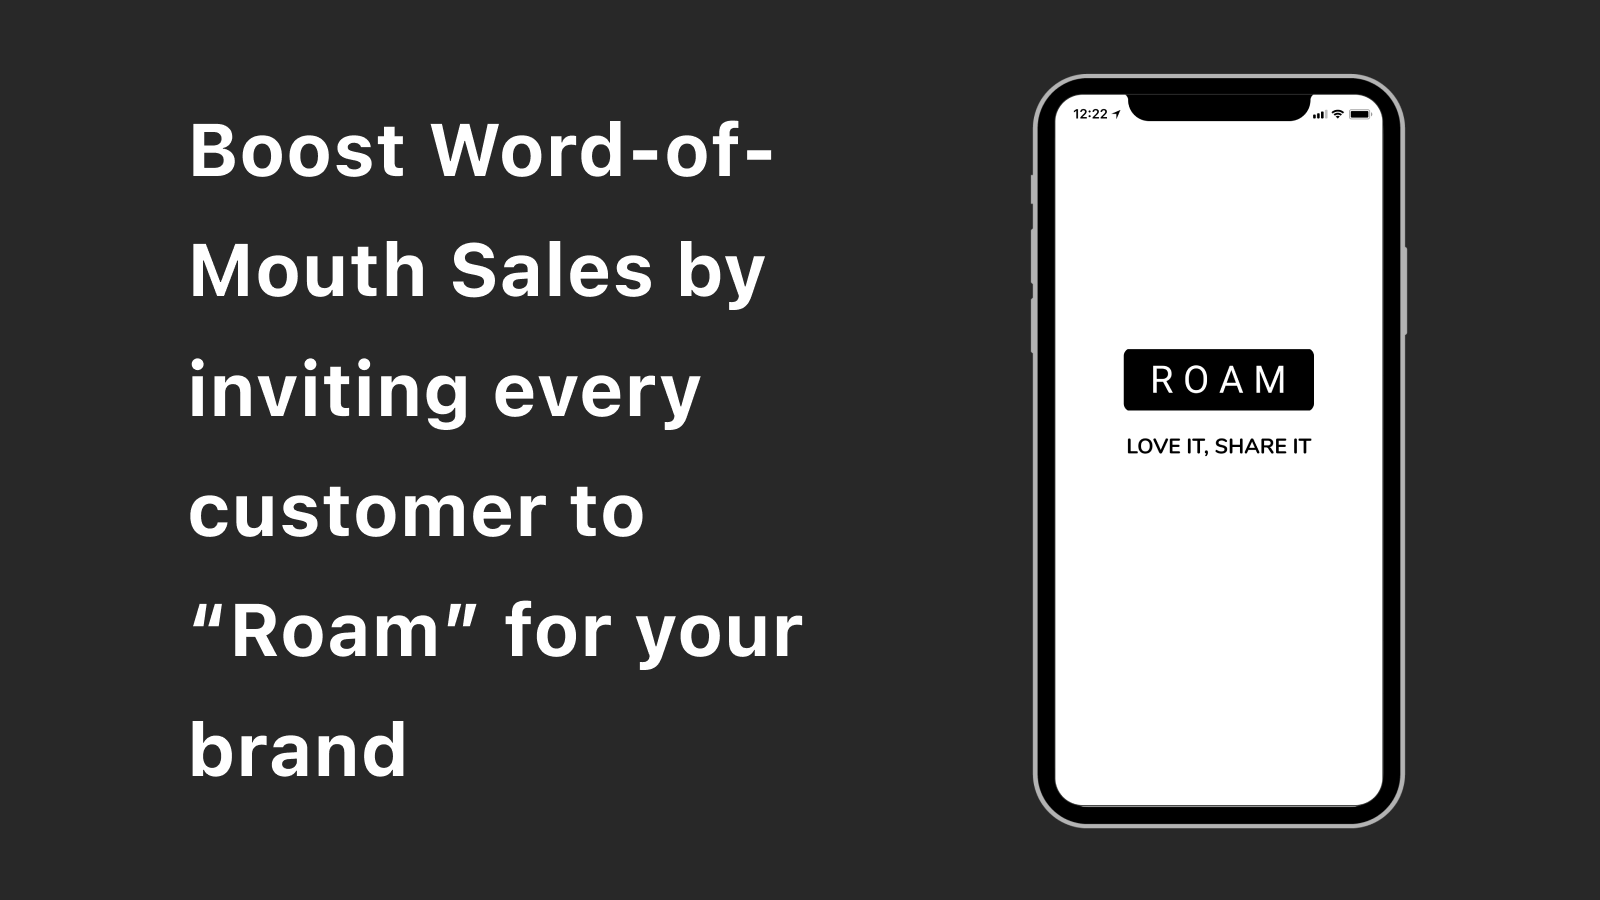 Boost word-of-mouth-sales